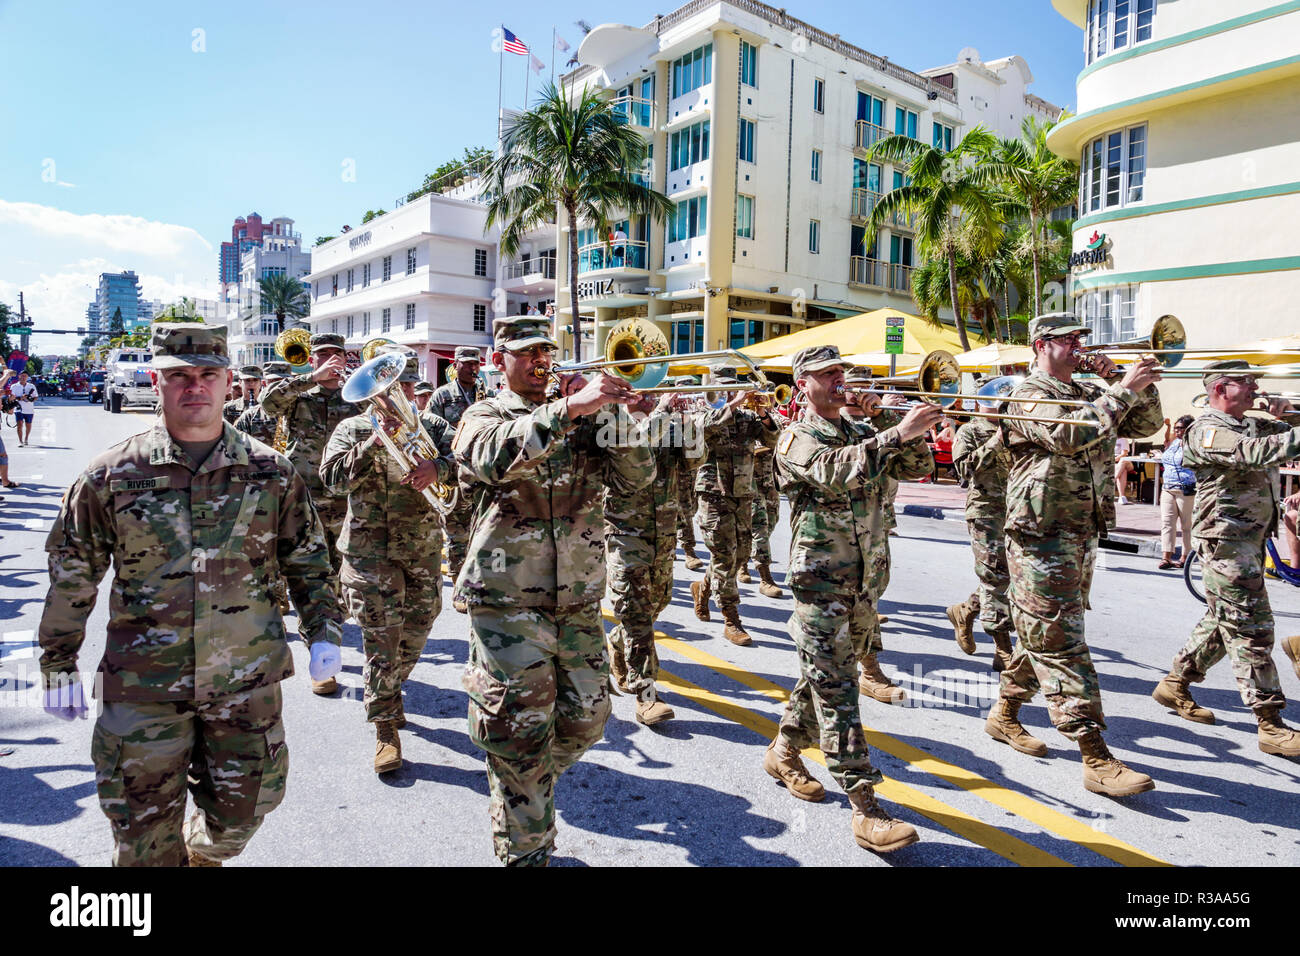 Miami Beach Florida,Ocean Drive,Veterans Day Parade Activities,Army band Marching,FL181115030 Banque D'Images